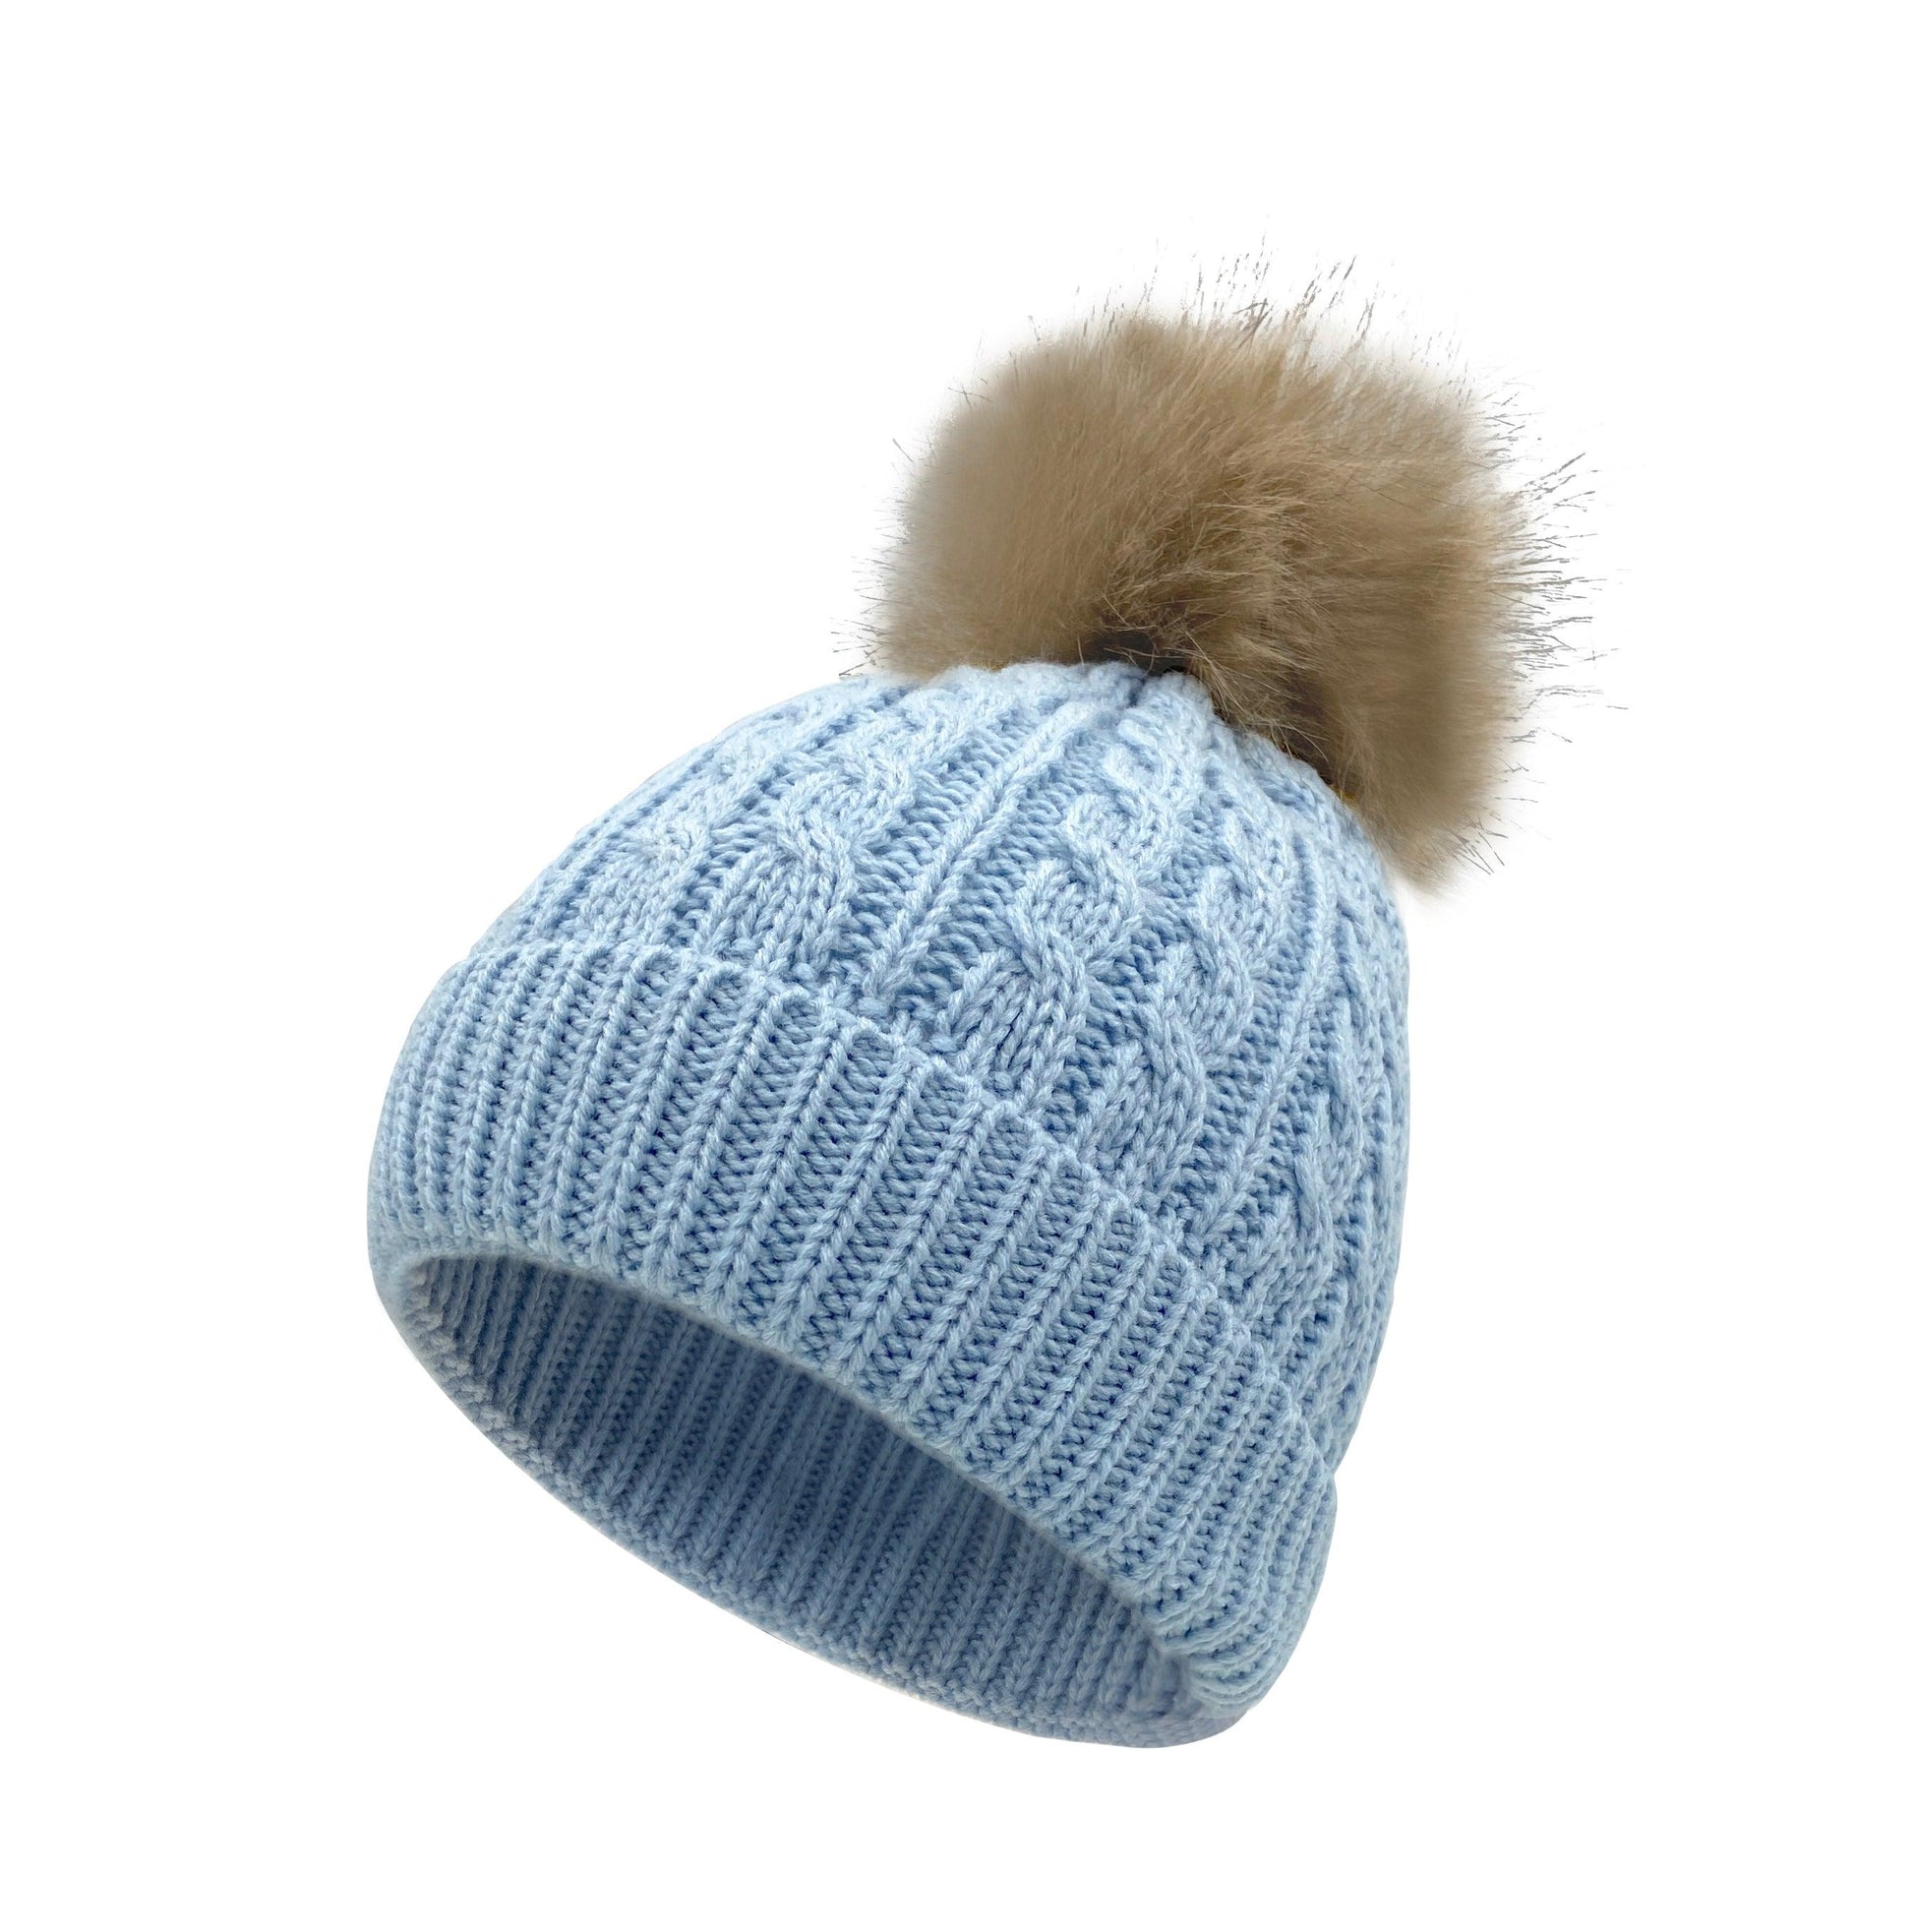 ACCEHUT kids beanie hat Ages 2-7 warm chunky thick knit slouch beanie skull kids hat - ACCEHUT